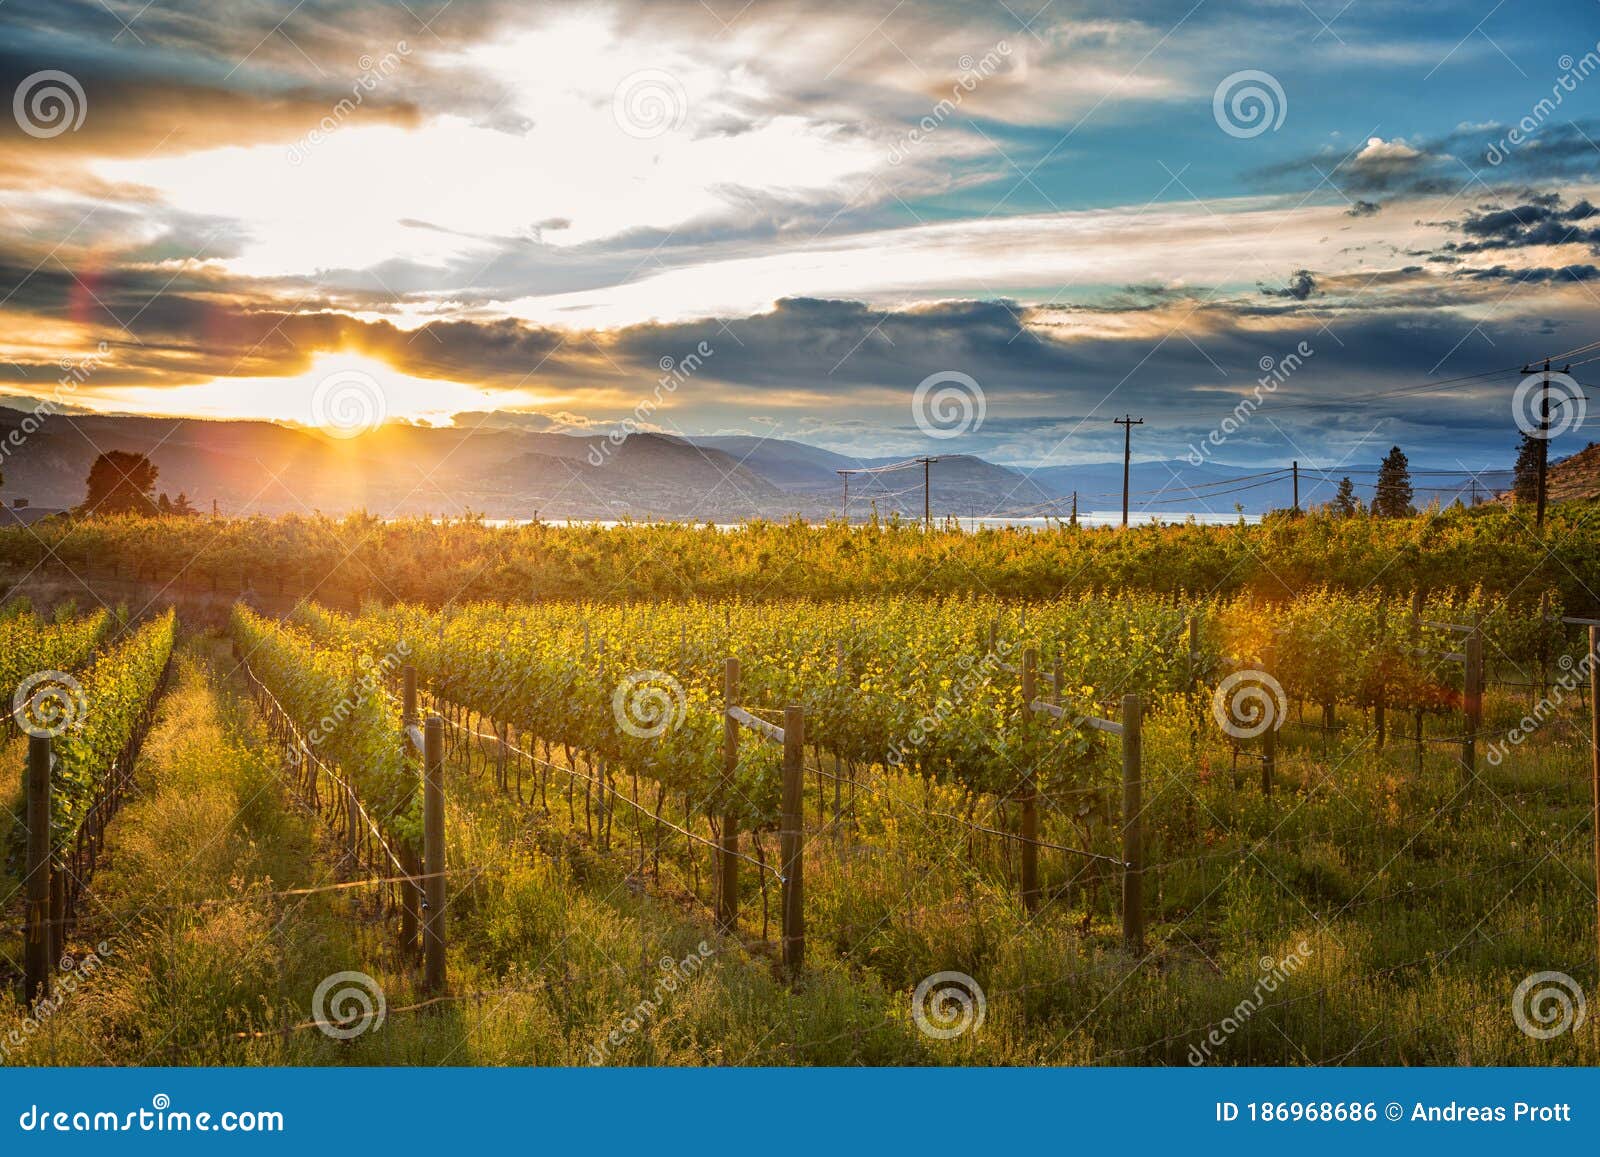 sunset at okanagan lake near penticton with a vineyard in the foreground, british columbia, canada